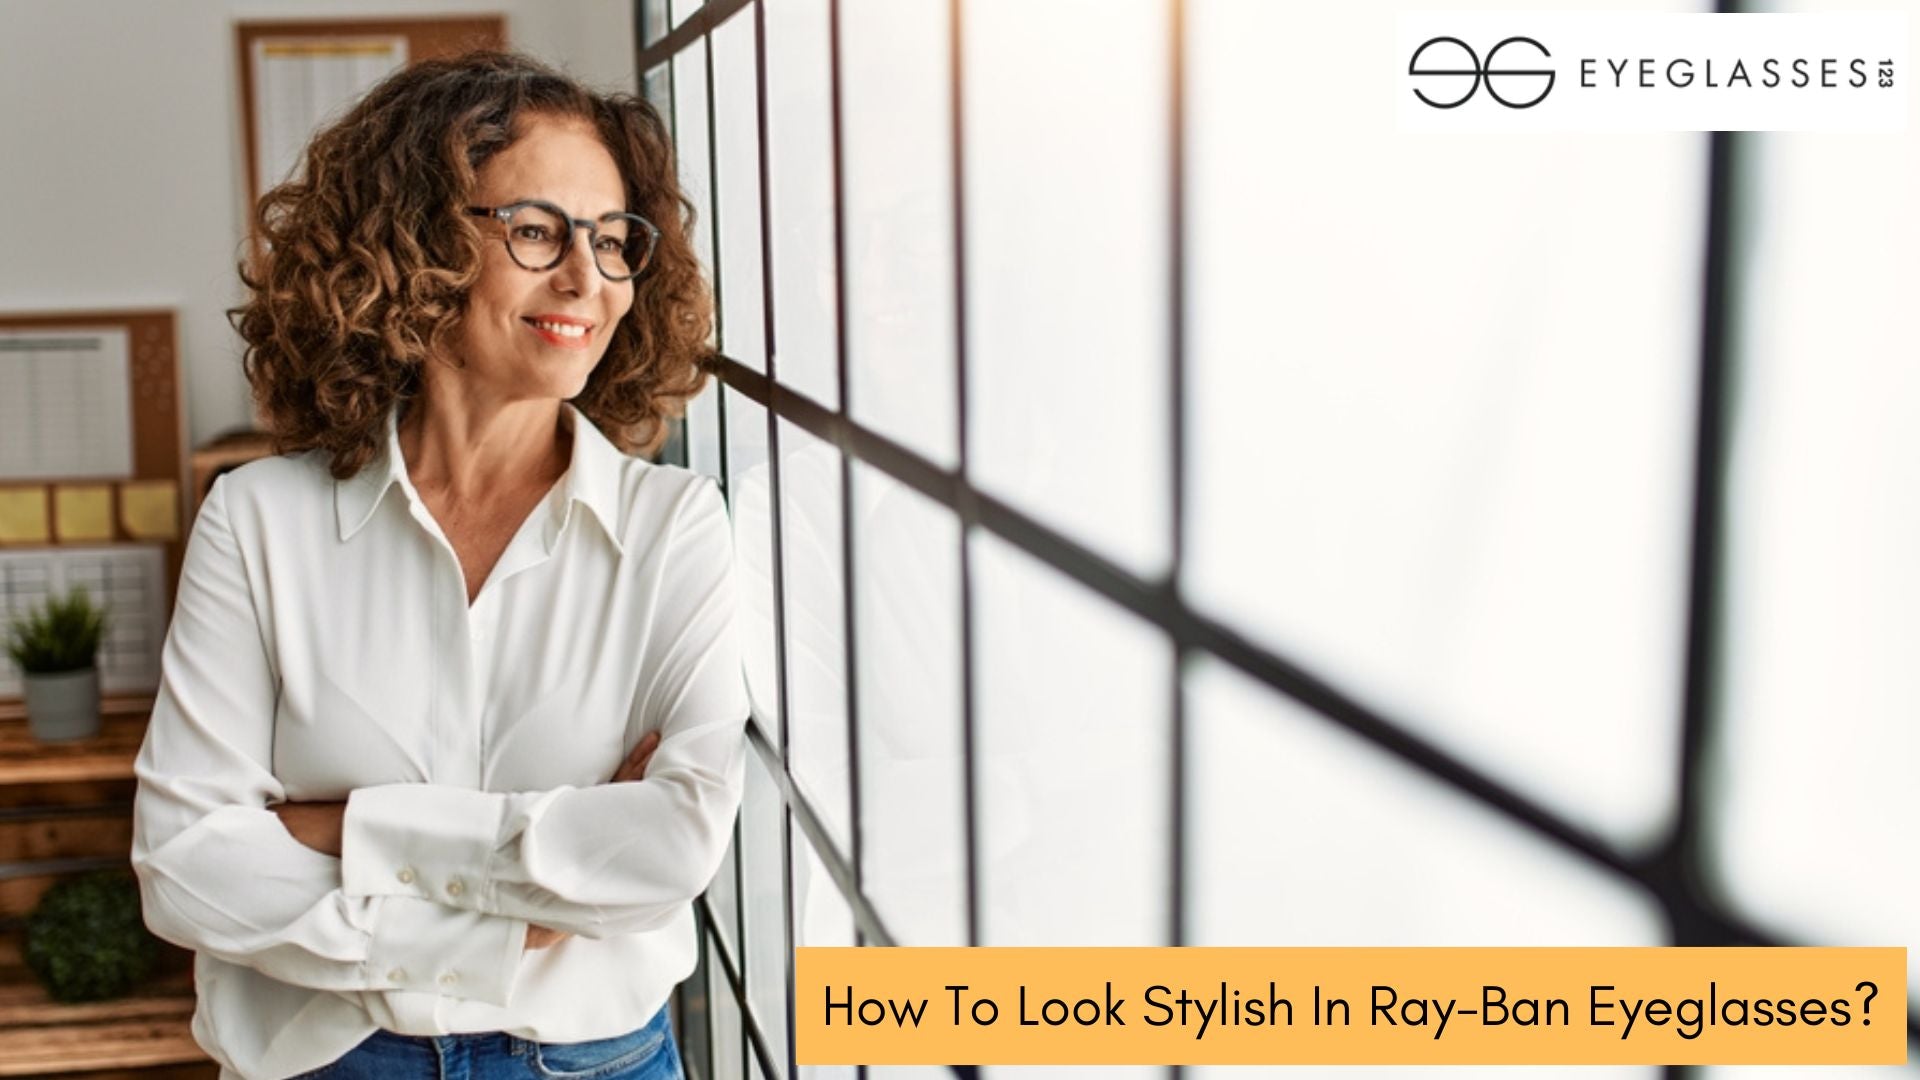 How To Look Stylish In Ray-Ban Eyeglasses?